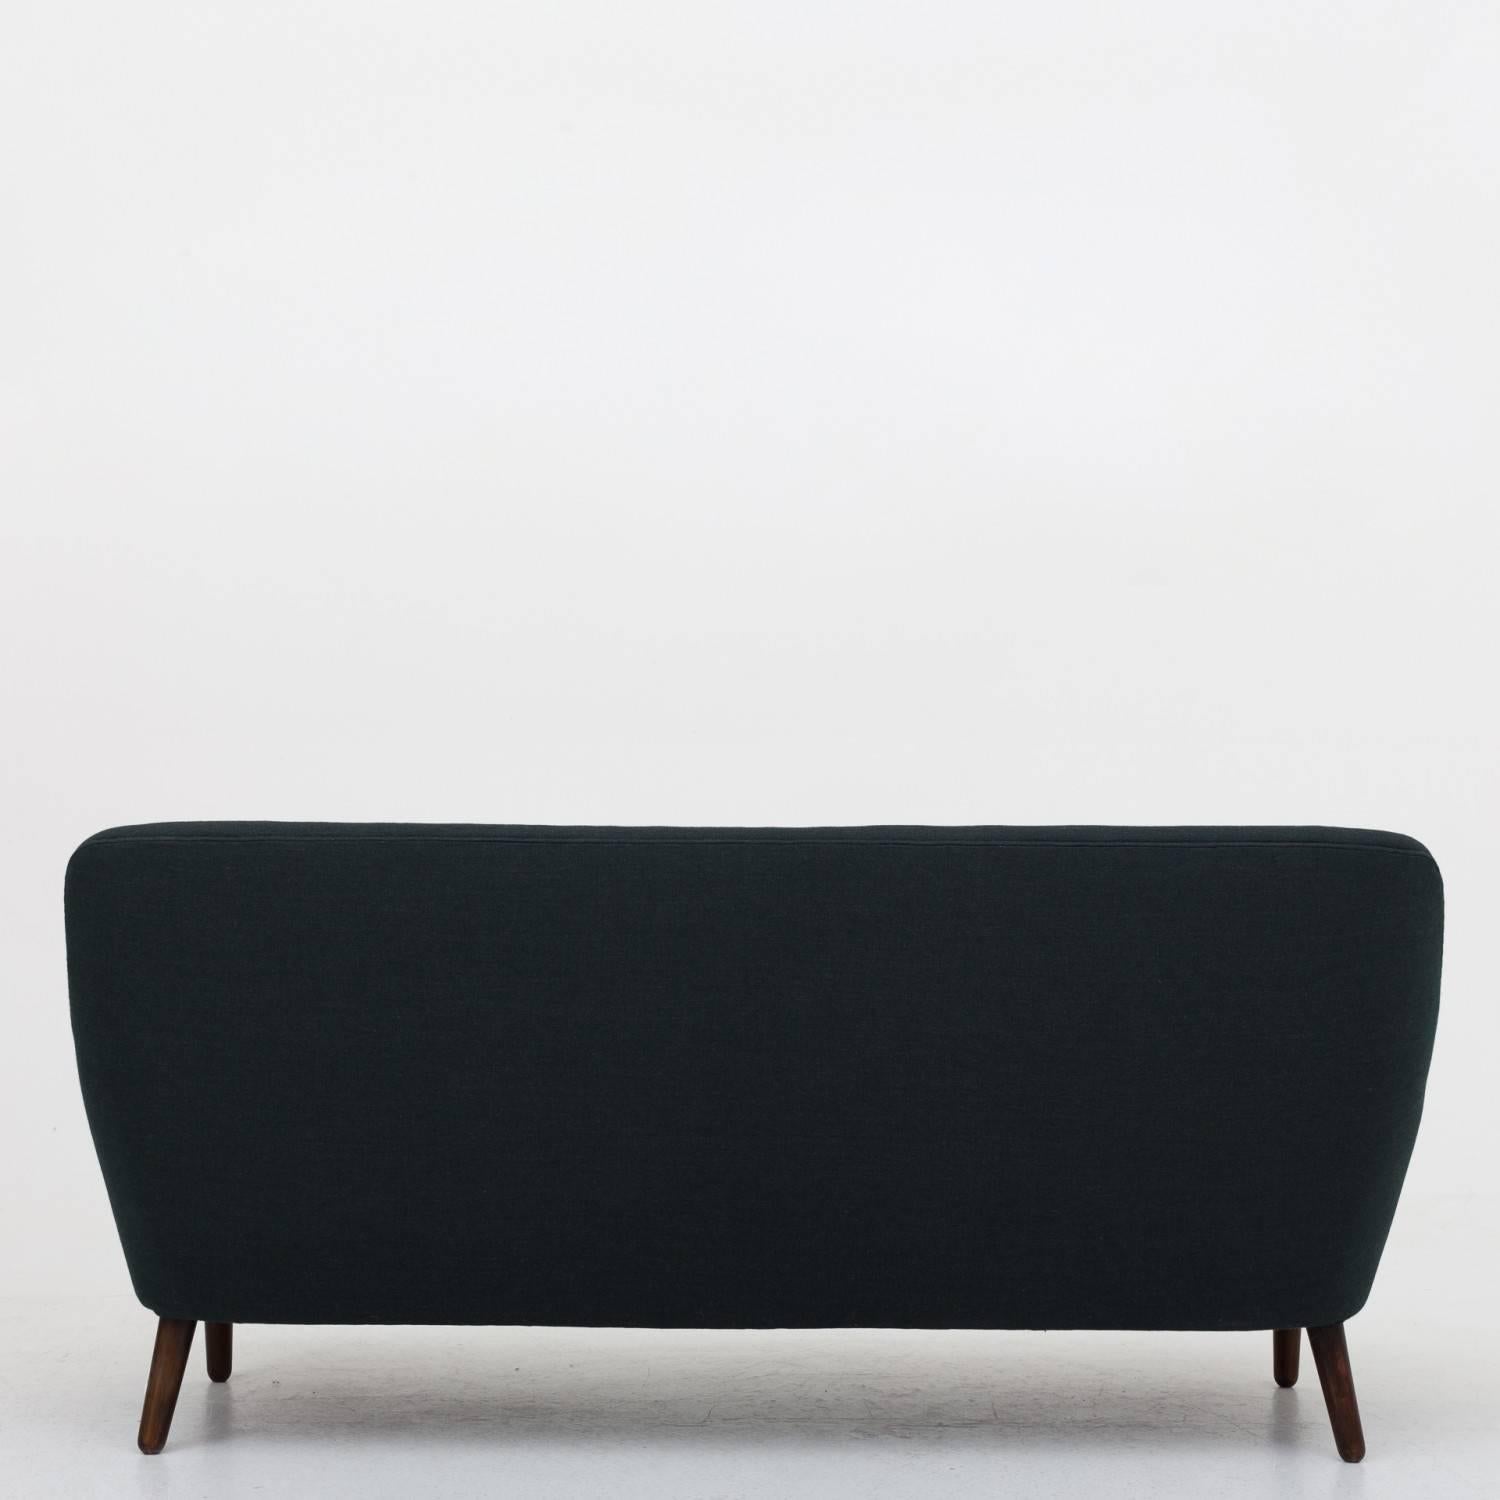 Three-seat sofa reupholstered in wool, Fjord 911 and legs in oak. Maker unknown Danish cabinetmaker.